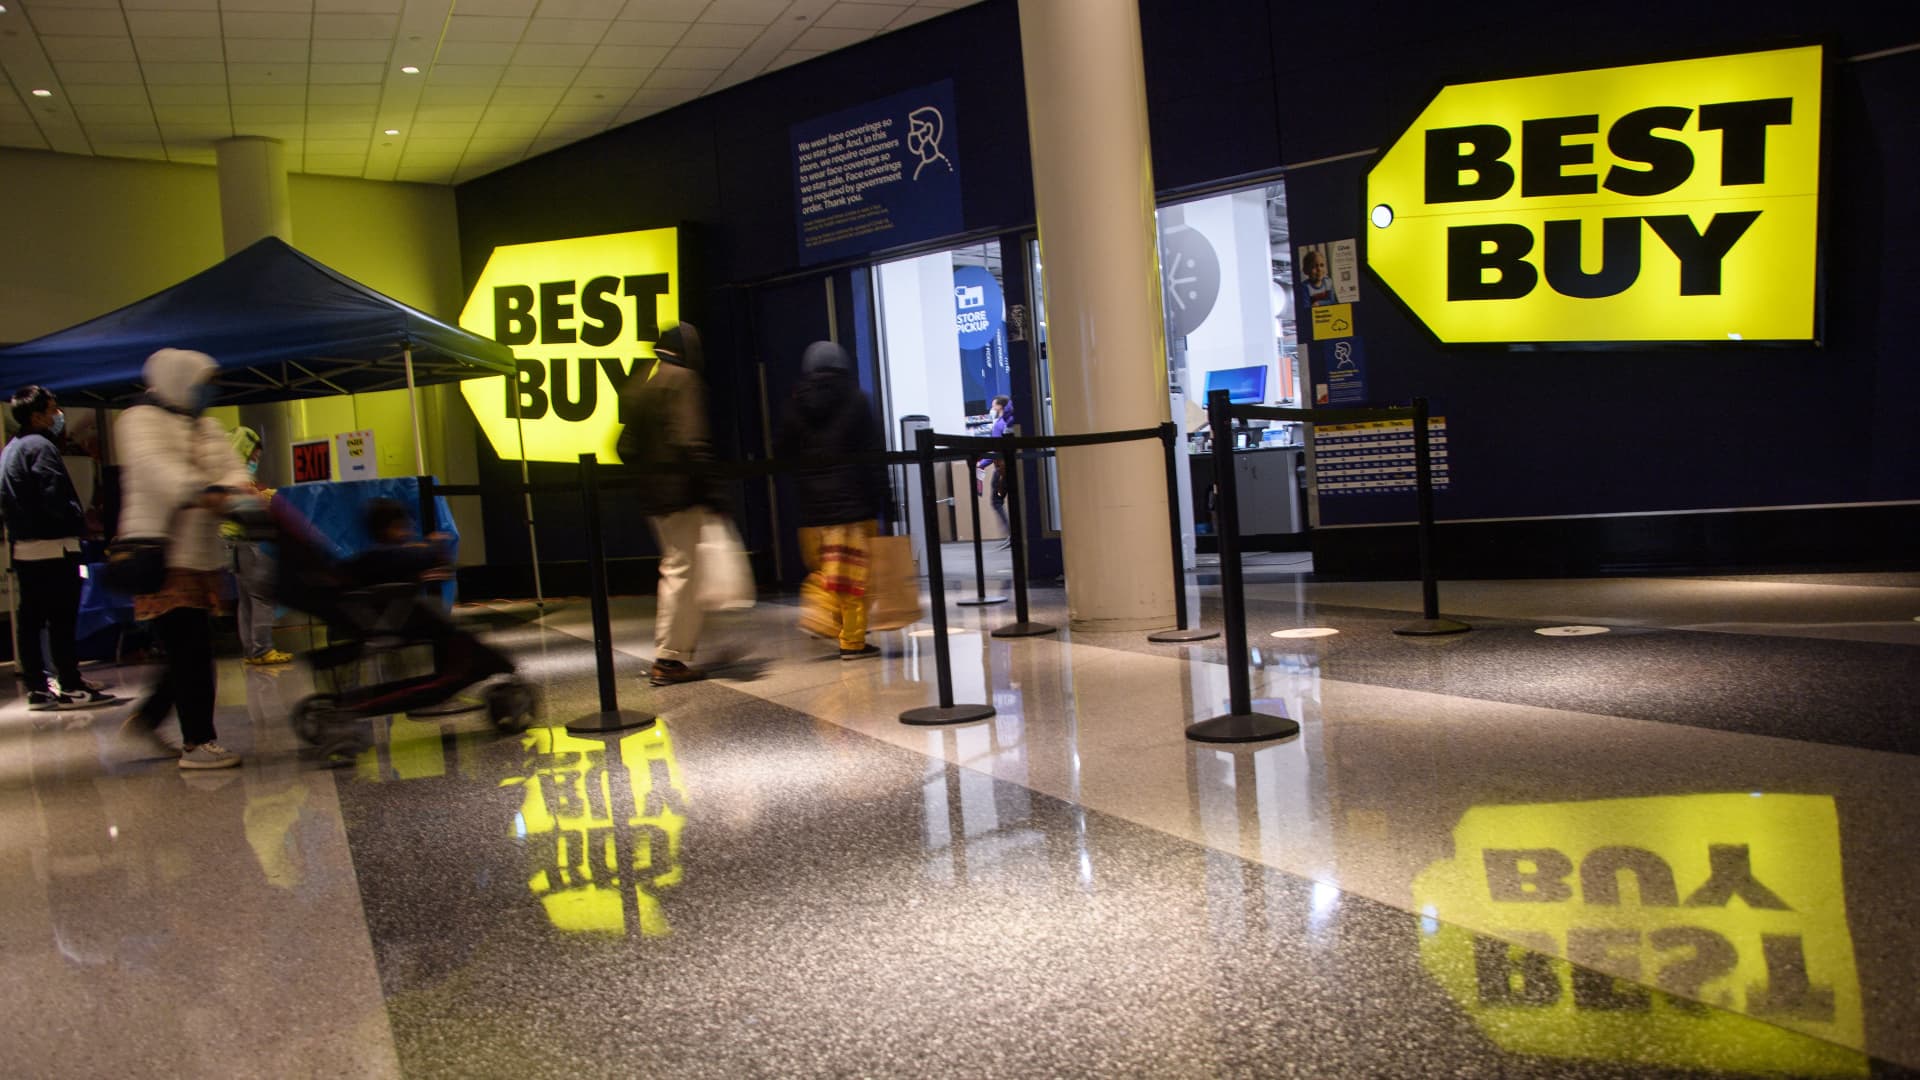 Best Buy to sell OTC hearing aid devices after FDA regulation